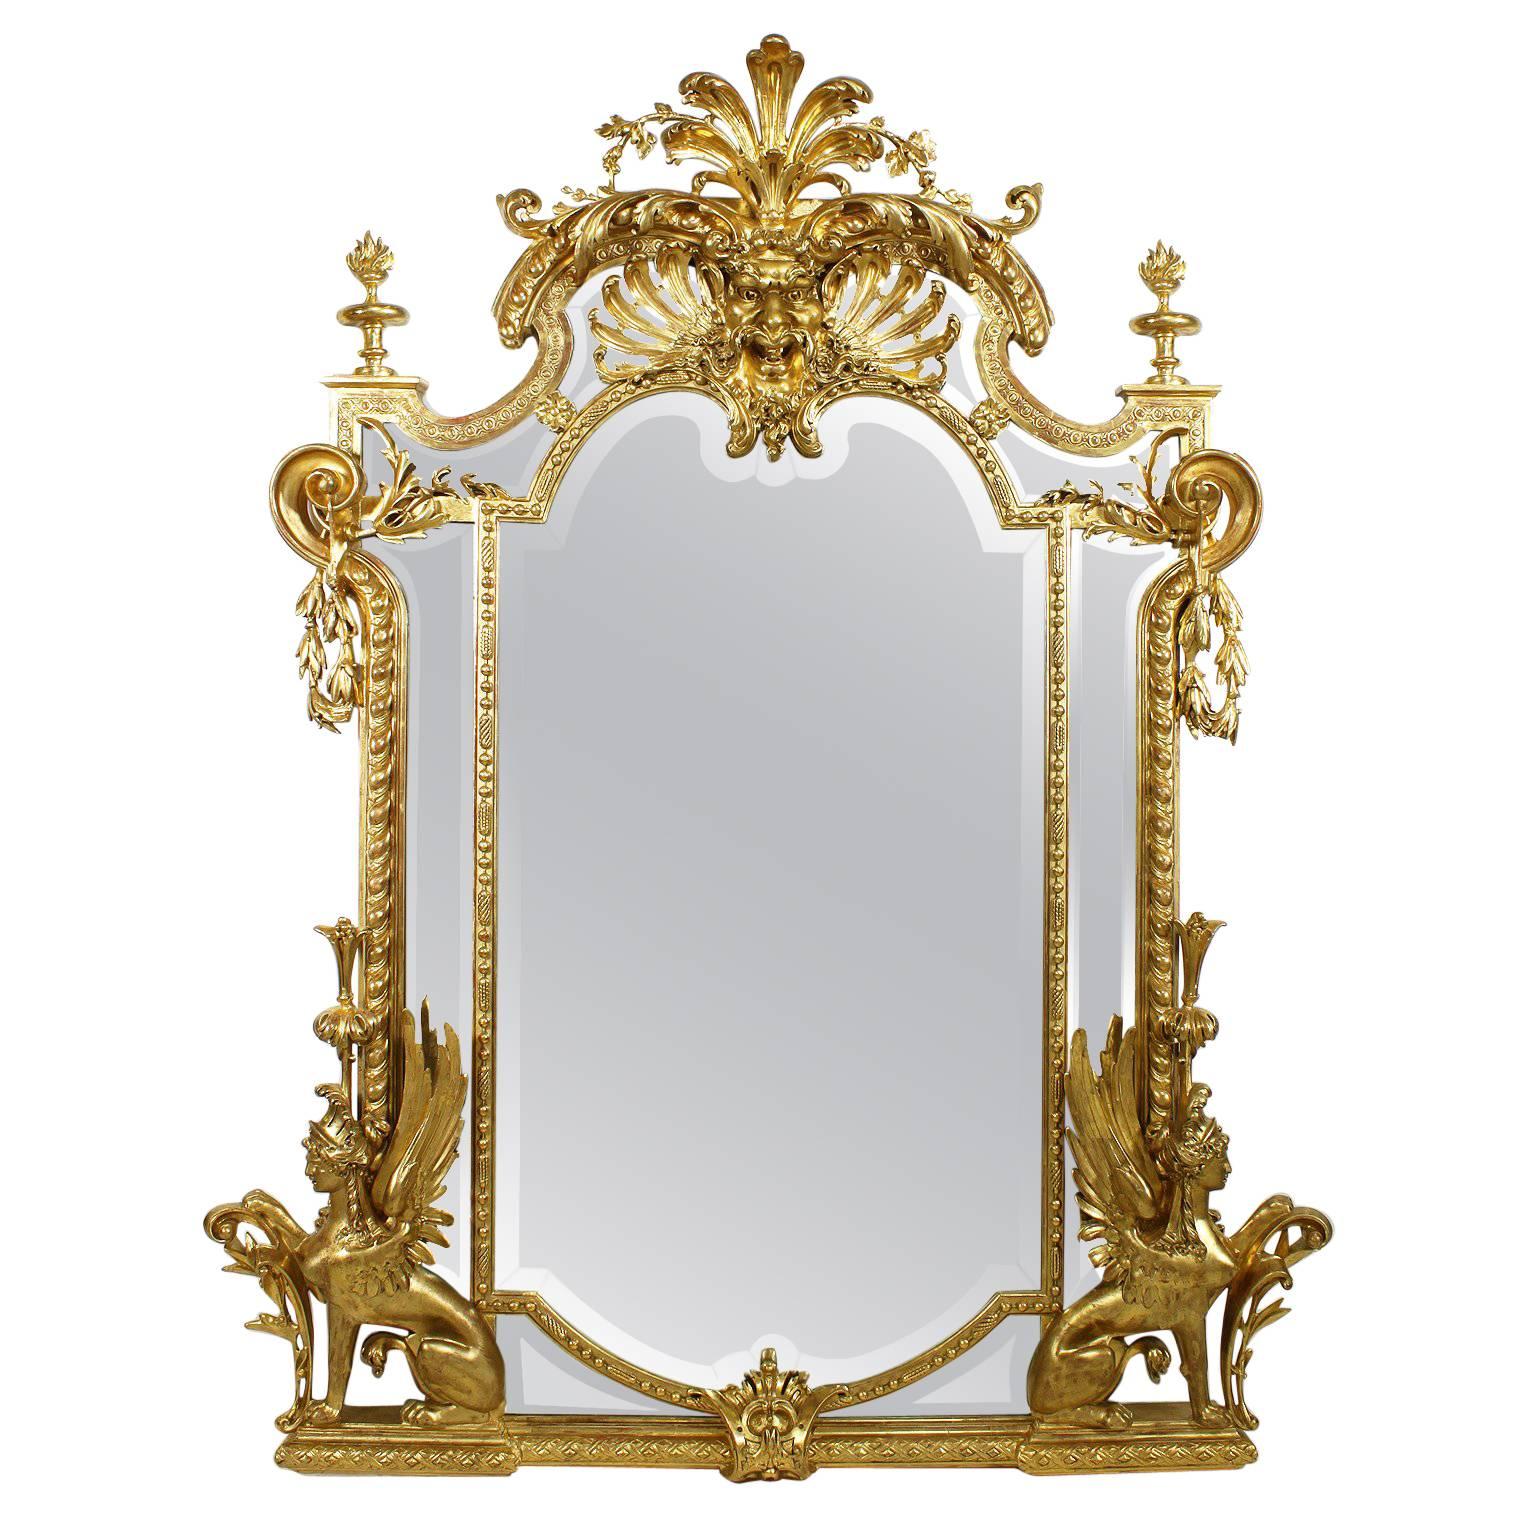 French Empire Style 19th Century Napoleon III Giltwood Mirror with Sphinxes